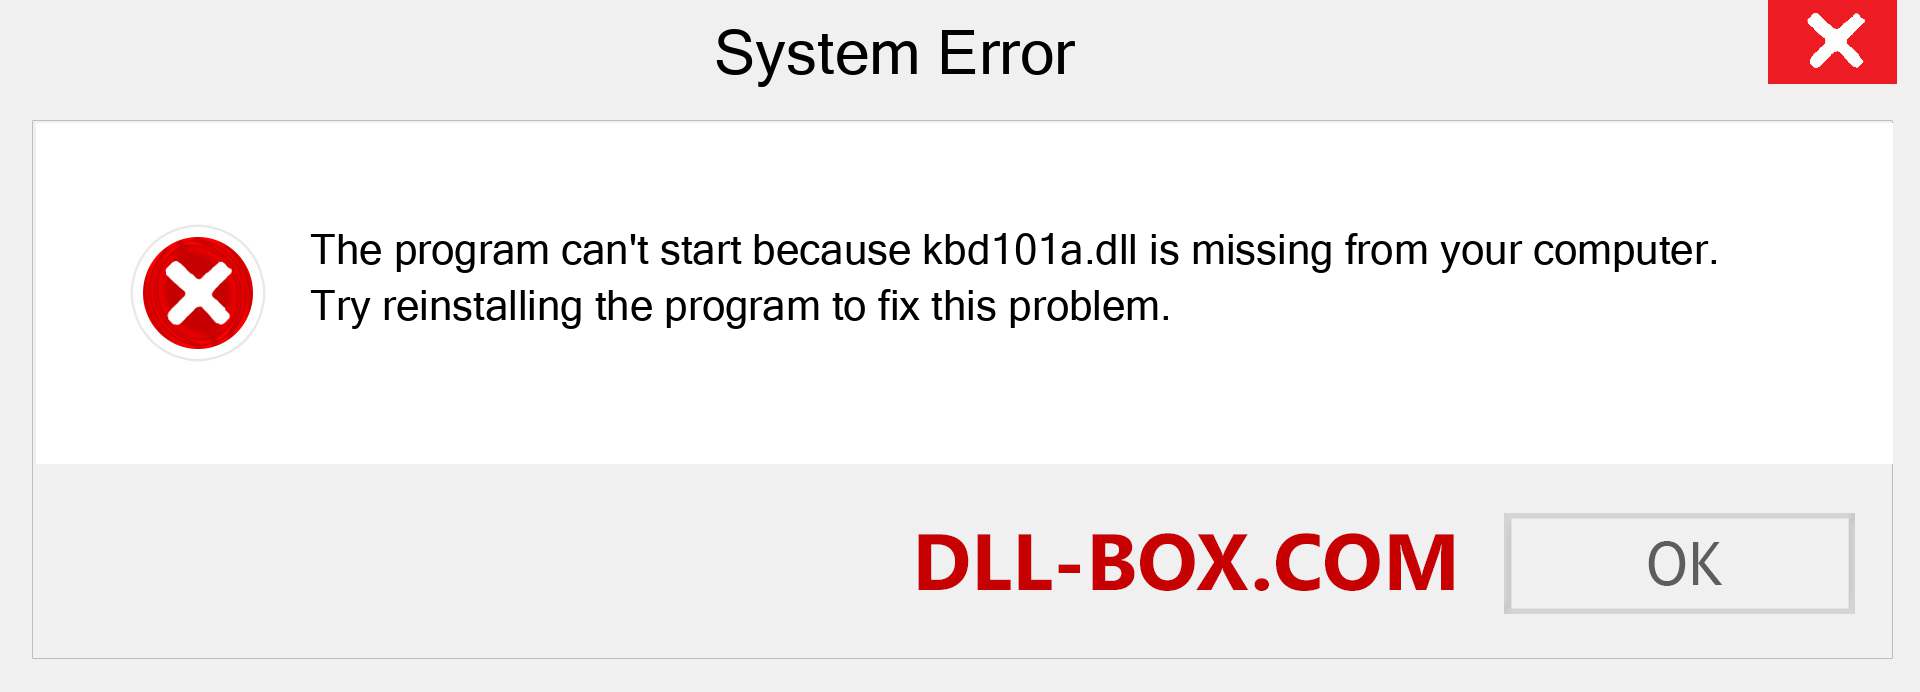  kbd101a.dll file is missing?. Download for Windows 7, 8, 10 - Fix  kbd101a dll Missing Error on Windows, photos, images